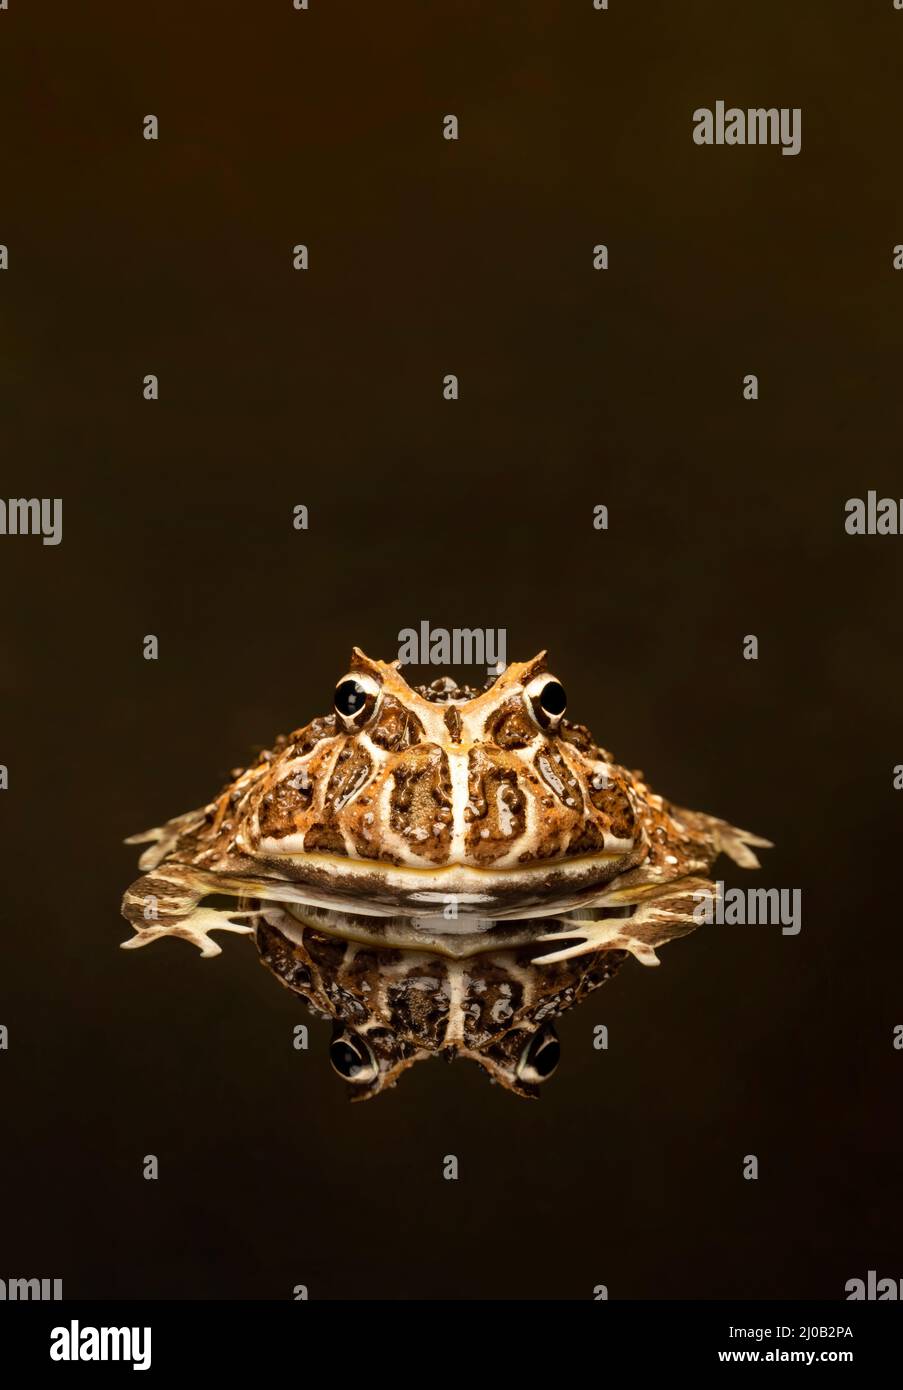 An Ornate Horned Frog, (Ceratophrys ornata), reflecting in a pool. This is also known as The Argentine Horned Frog or Argentine Wide-Mouthed Frog Stock Photo